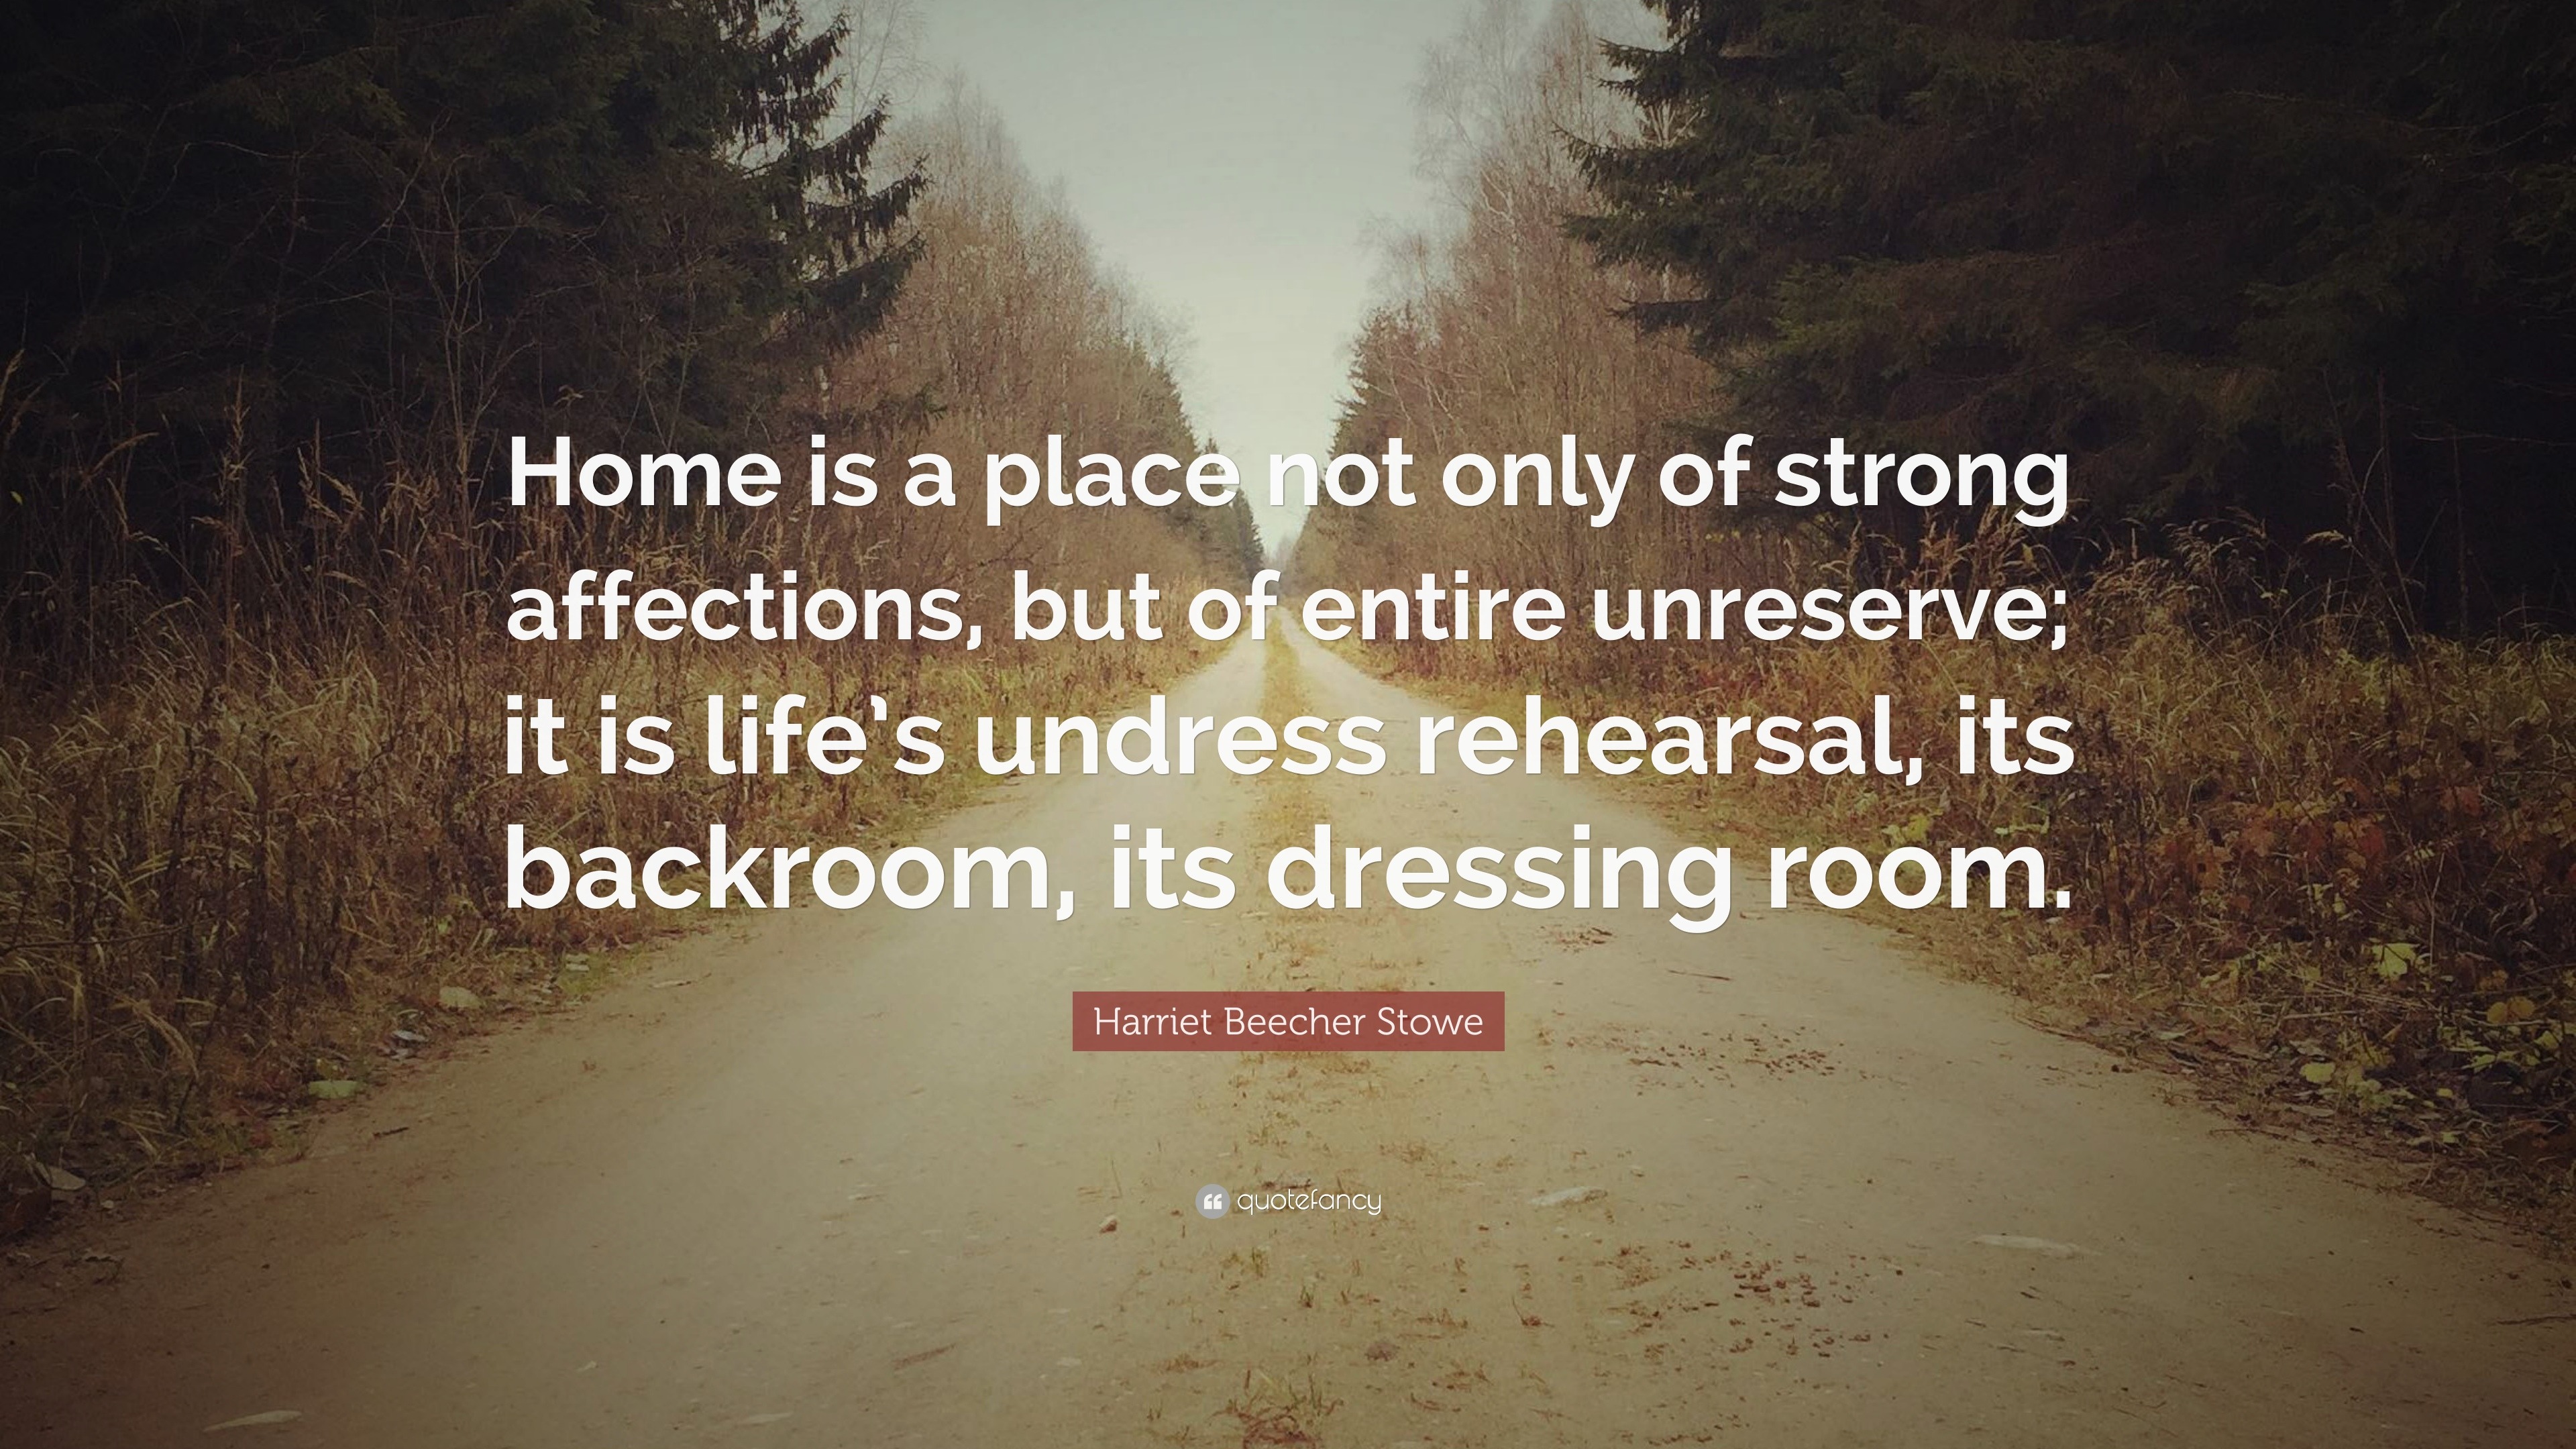 Harriet Beecher Stowe Quote: “Home is a place not only of strong ...